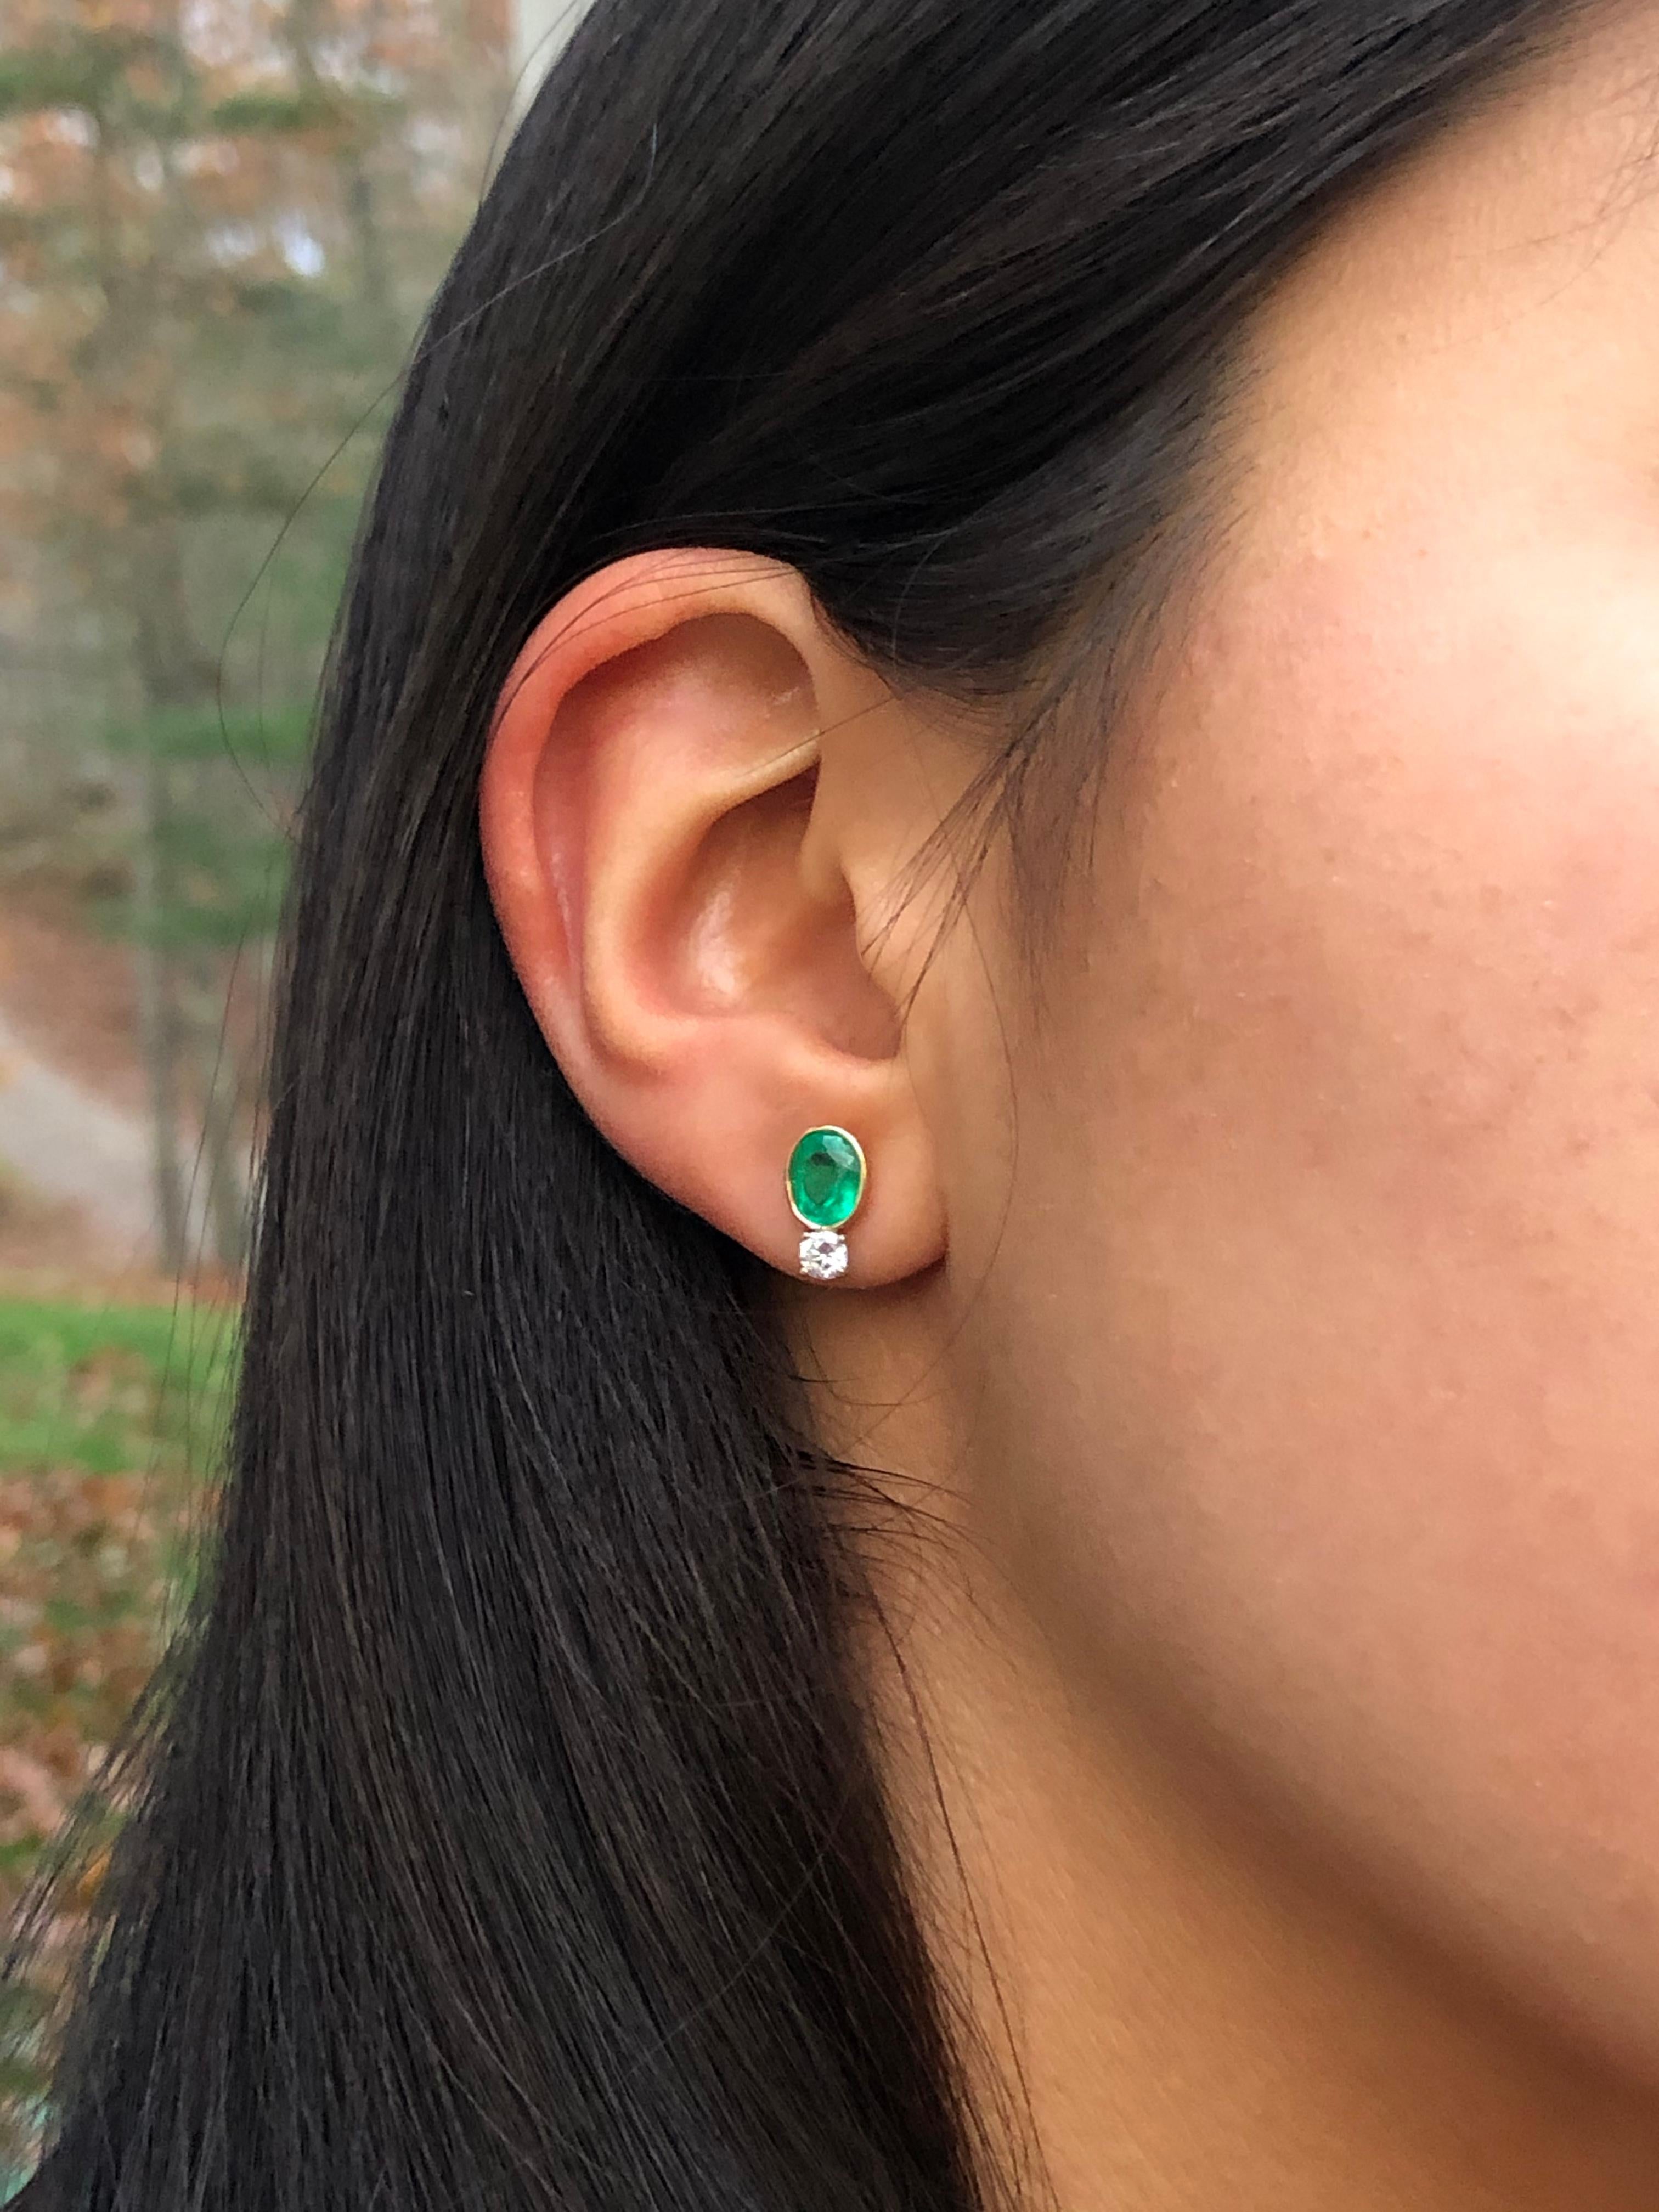 2.35 Carat Natural Colombian Emerald Diamond Stud Earrings 18k 
Primary Stones: 100% Natural Colombian Emeralds
Shape or Cut : Oval Cut
Average Color/Clarity : Beautiful AAA+ Medium Green/ Clarity, VS
Total Weight Emeralds: Approx. 2.00 Carats (2